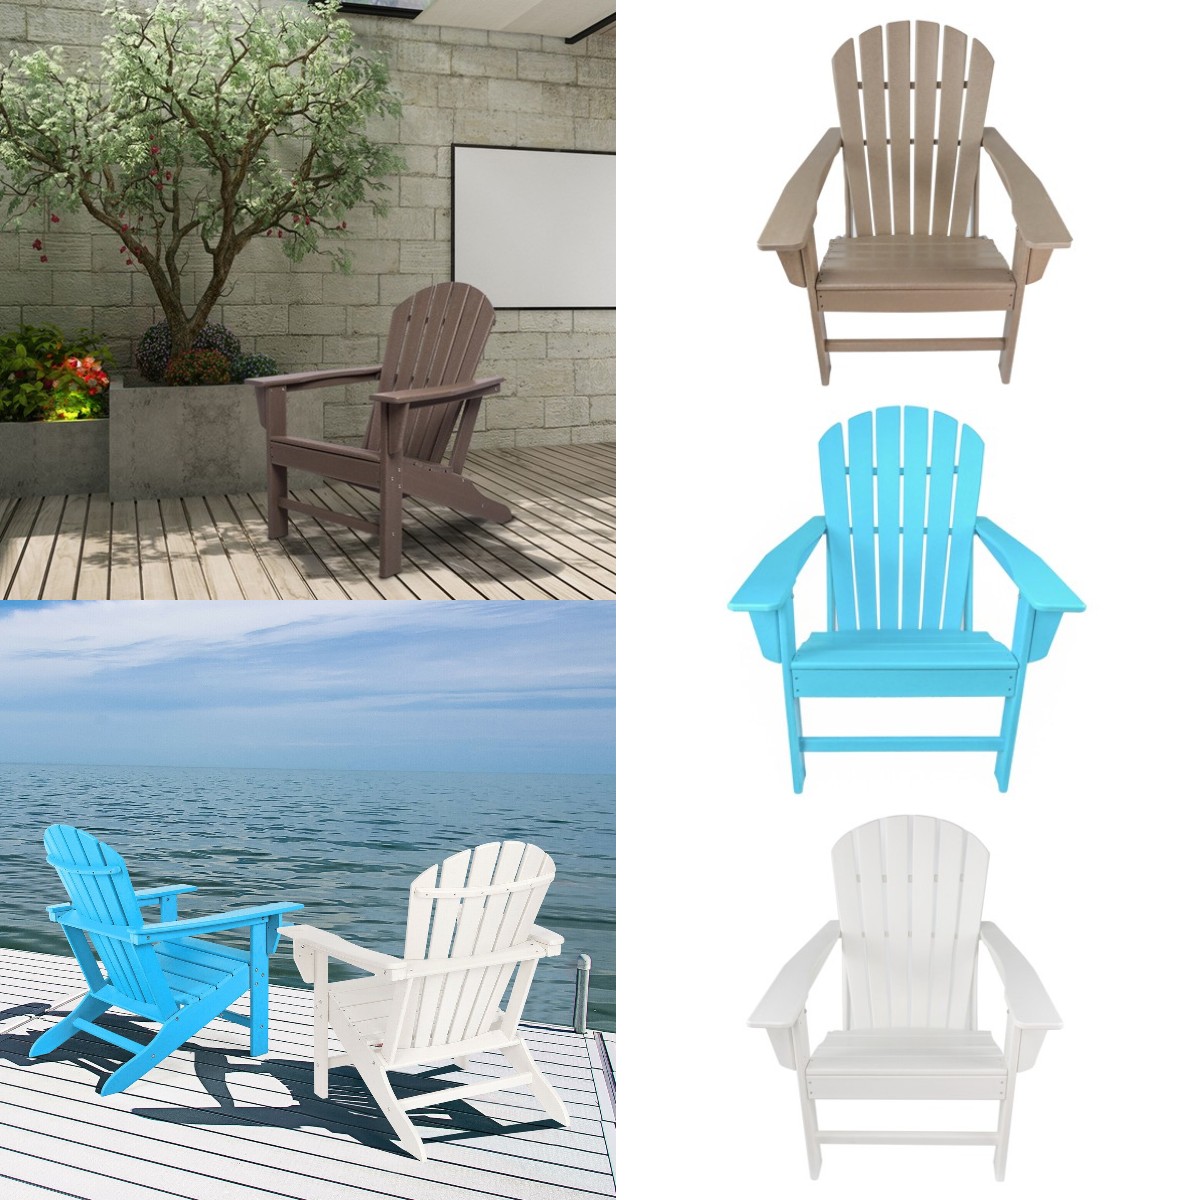 Folding Adirondack Chair Patio Chair Lawn Chair Outdoor 350 lbs Capacity Load Adirondack Chairs Weather Resistant for Patio Deck Garden 33.07*31.1*36.4" HDPE Resin Wood,White - image 1 of 9